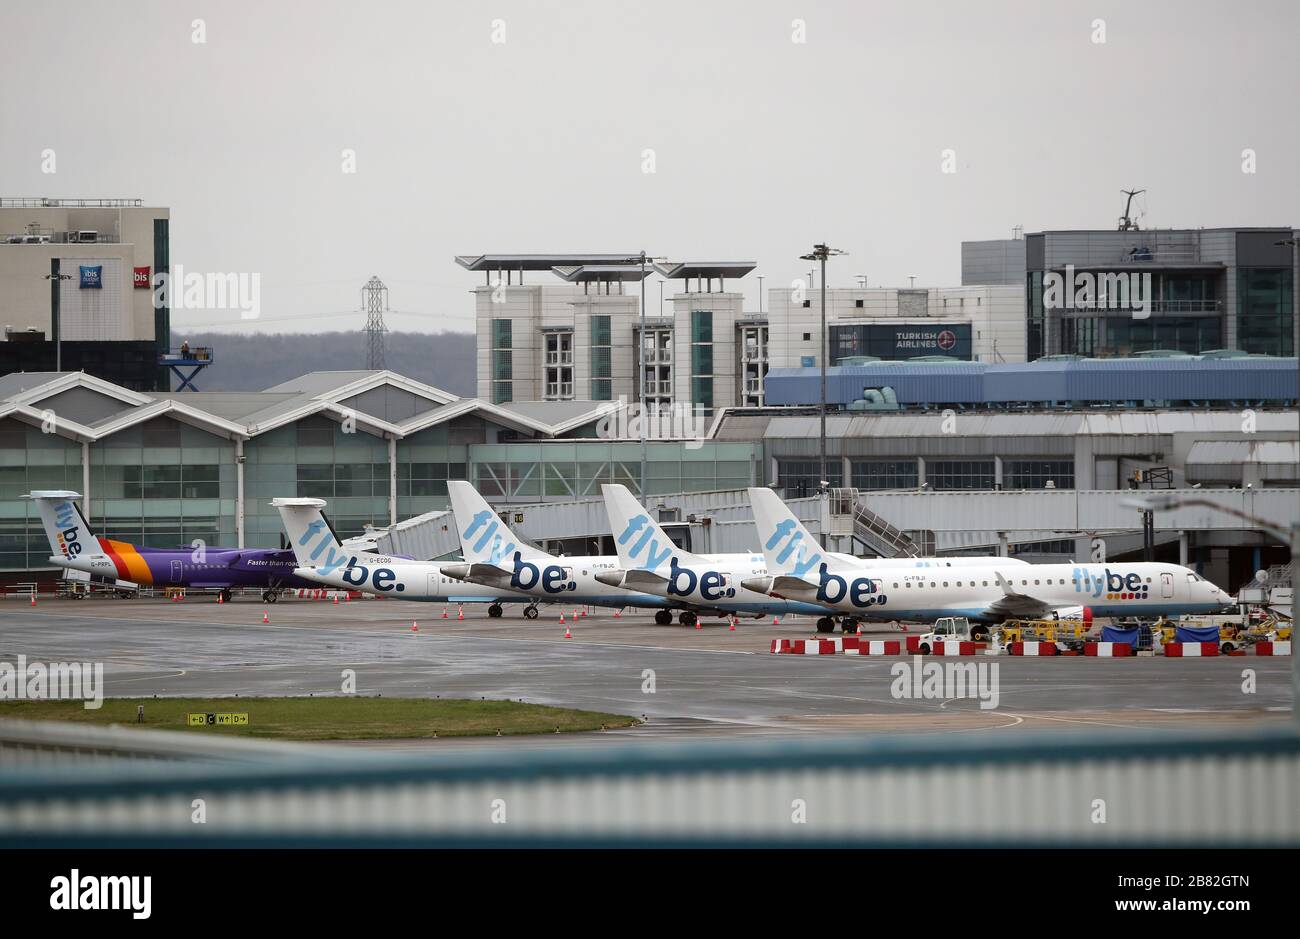 Flybe planes grounded as they recently went into administration seen at Birmingham Airport. Stock Photo